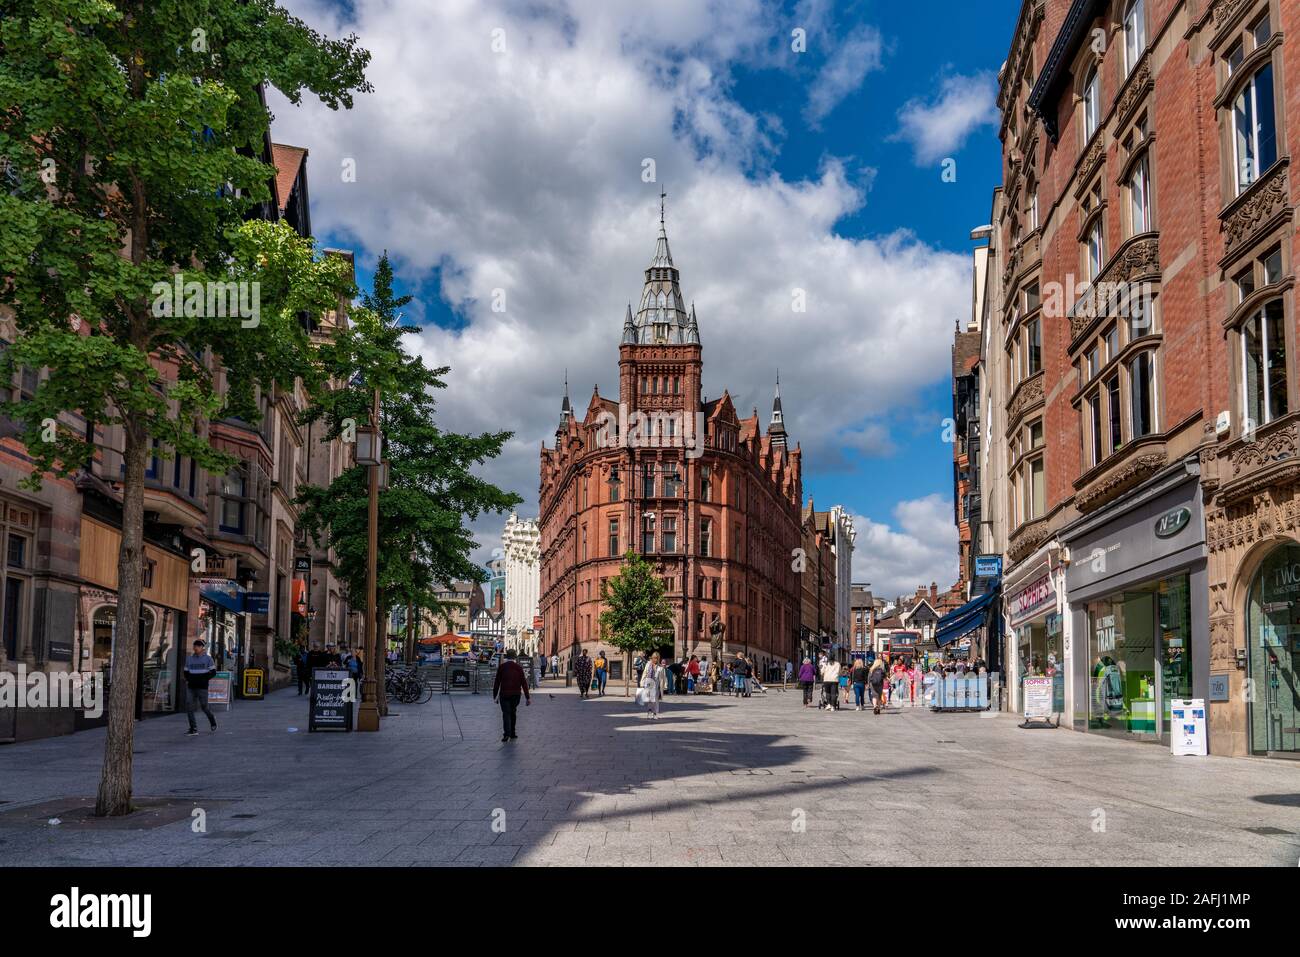 NOTTINGHAM, UNITED KINGDOM - AUGUST 15: This is a shopping street in the town centre area near the Old Market Square on August 15, 2019 in Nottingham Stock Photo